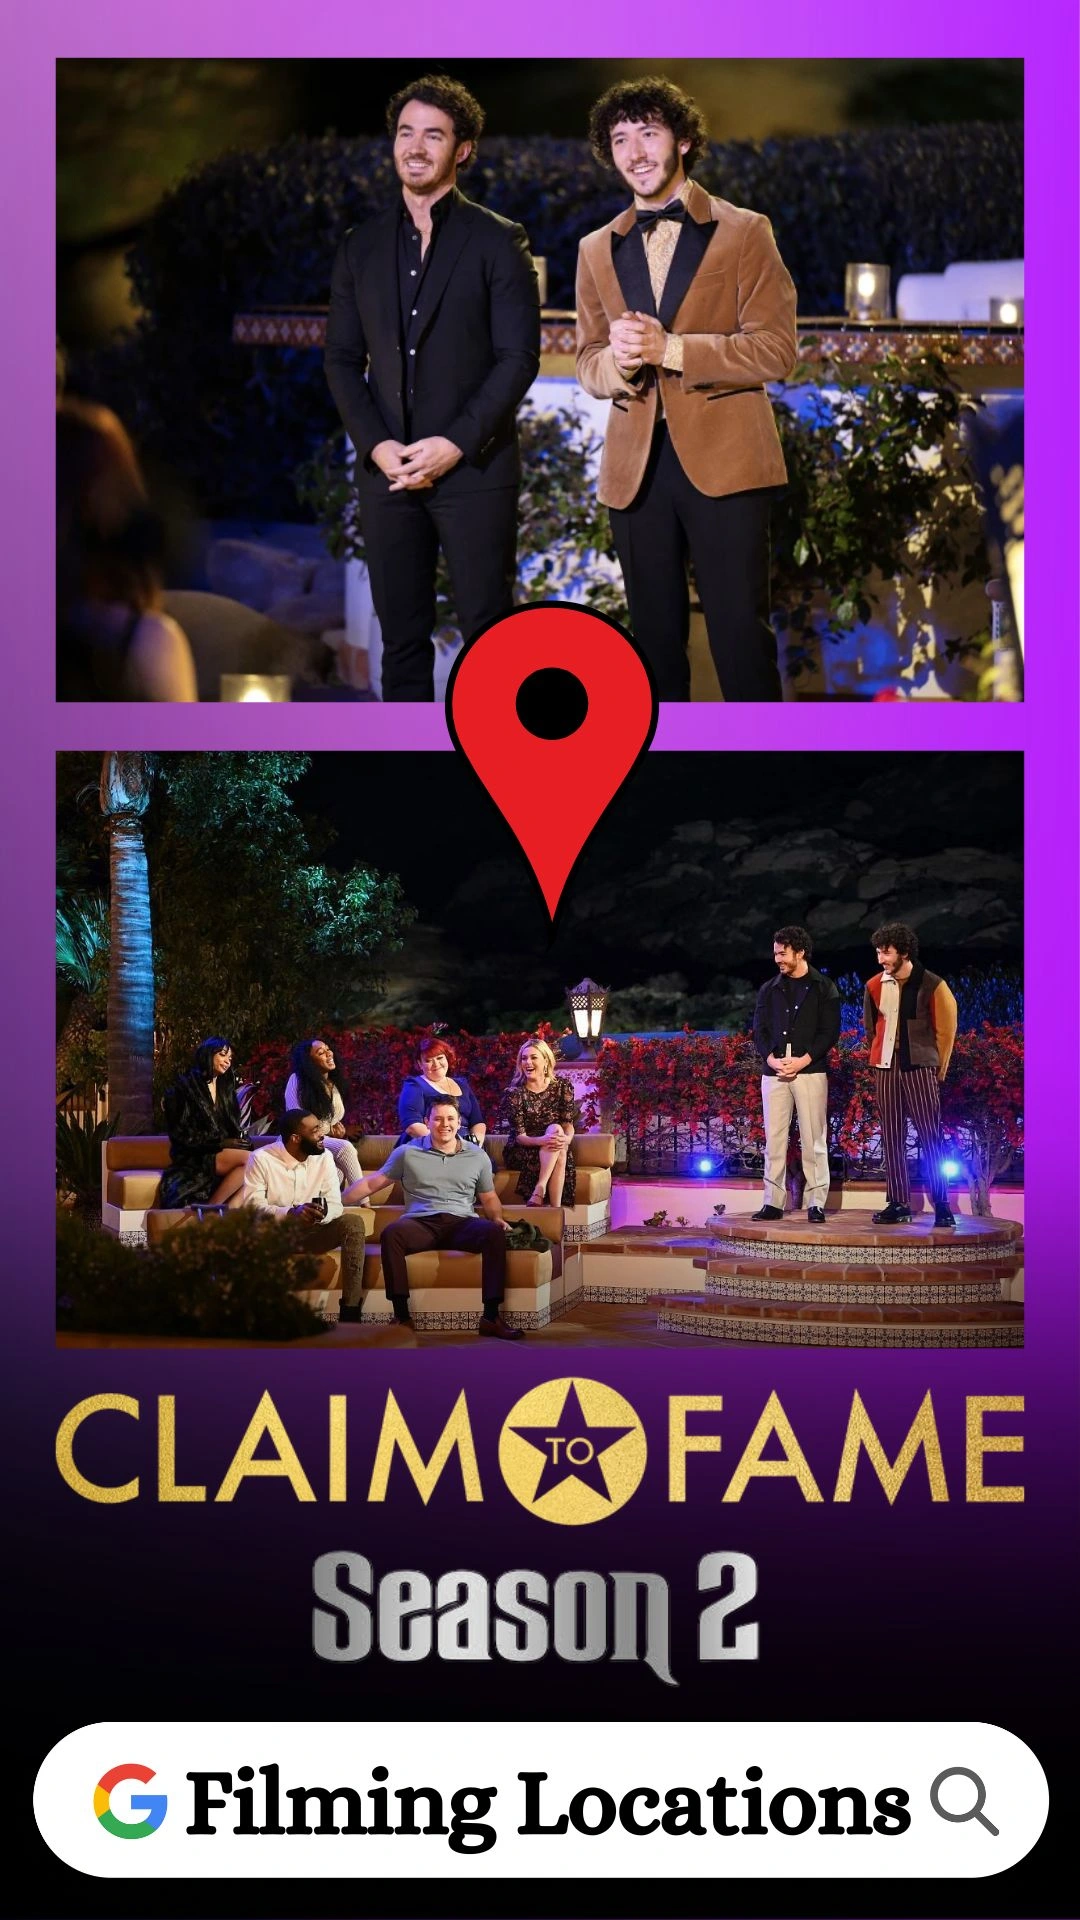 Claim to Fame Season 2 Filming Locations